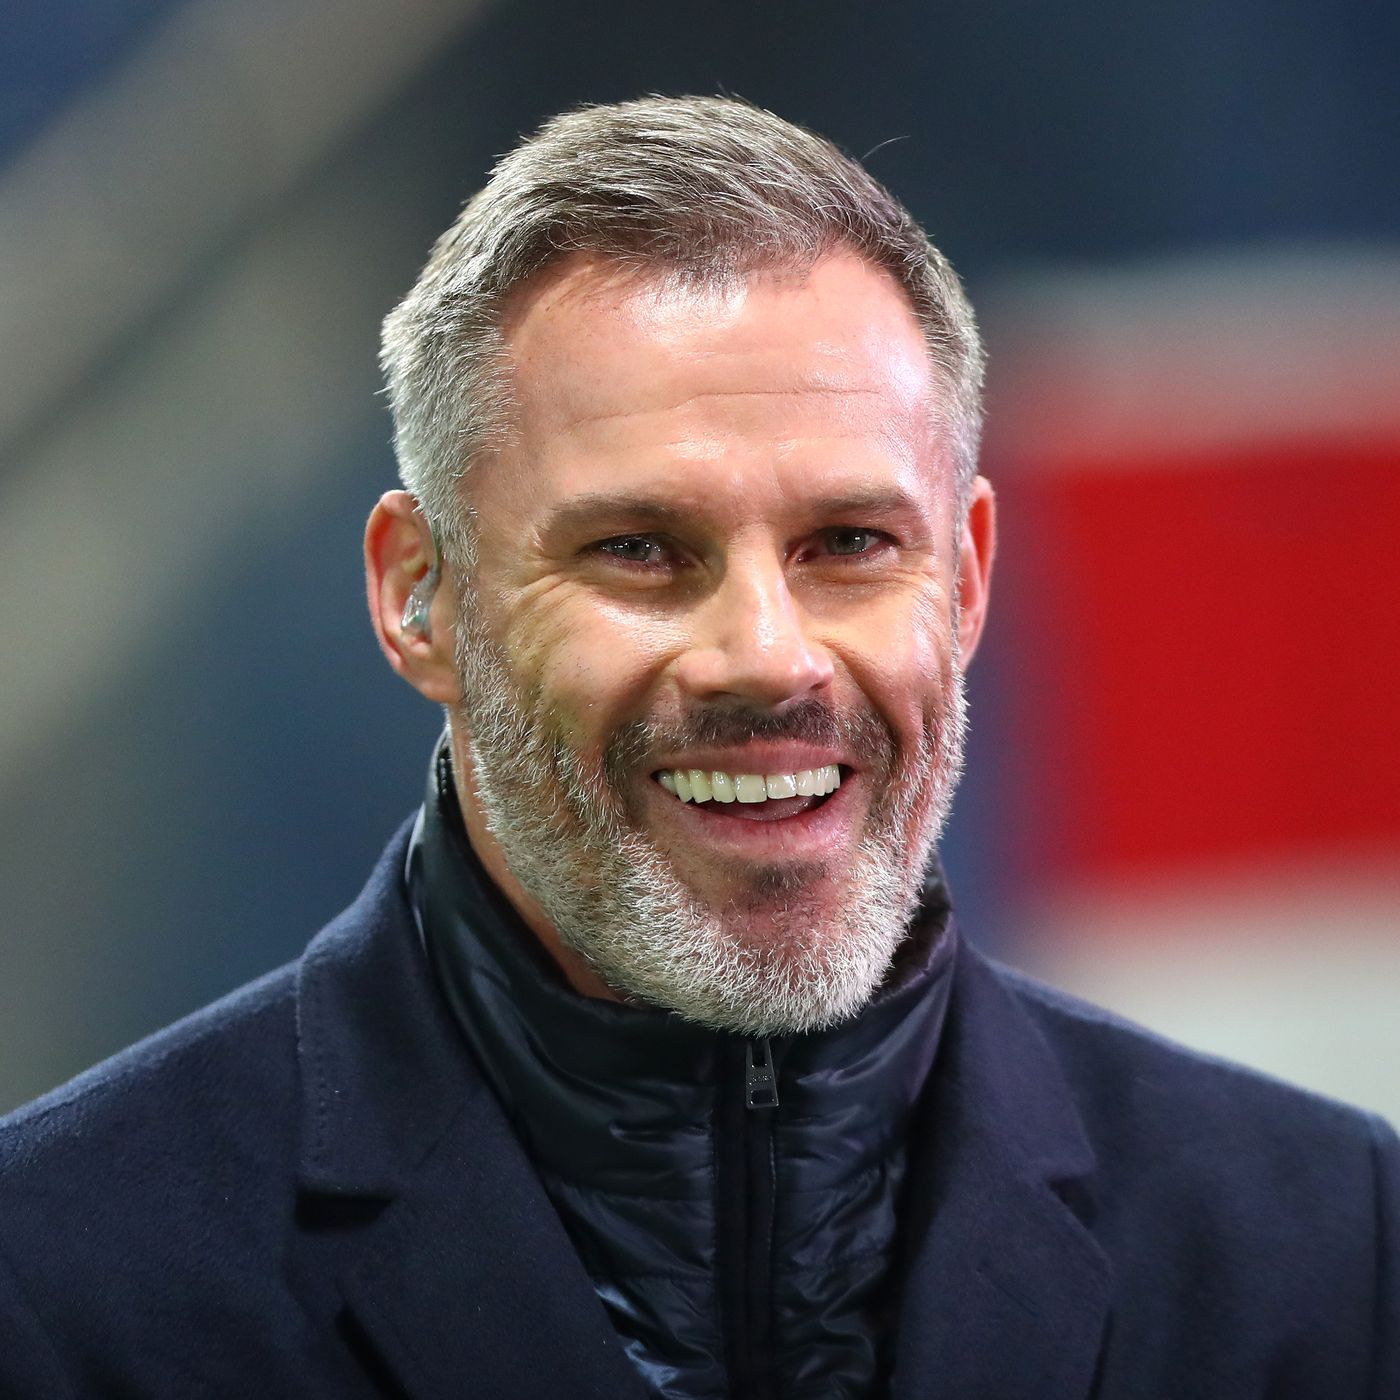 Jamie Carragher believes Arsenal will need to strengthen their squad considerably to go the full distance with Manchester City next season